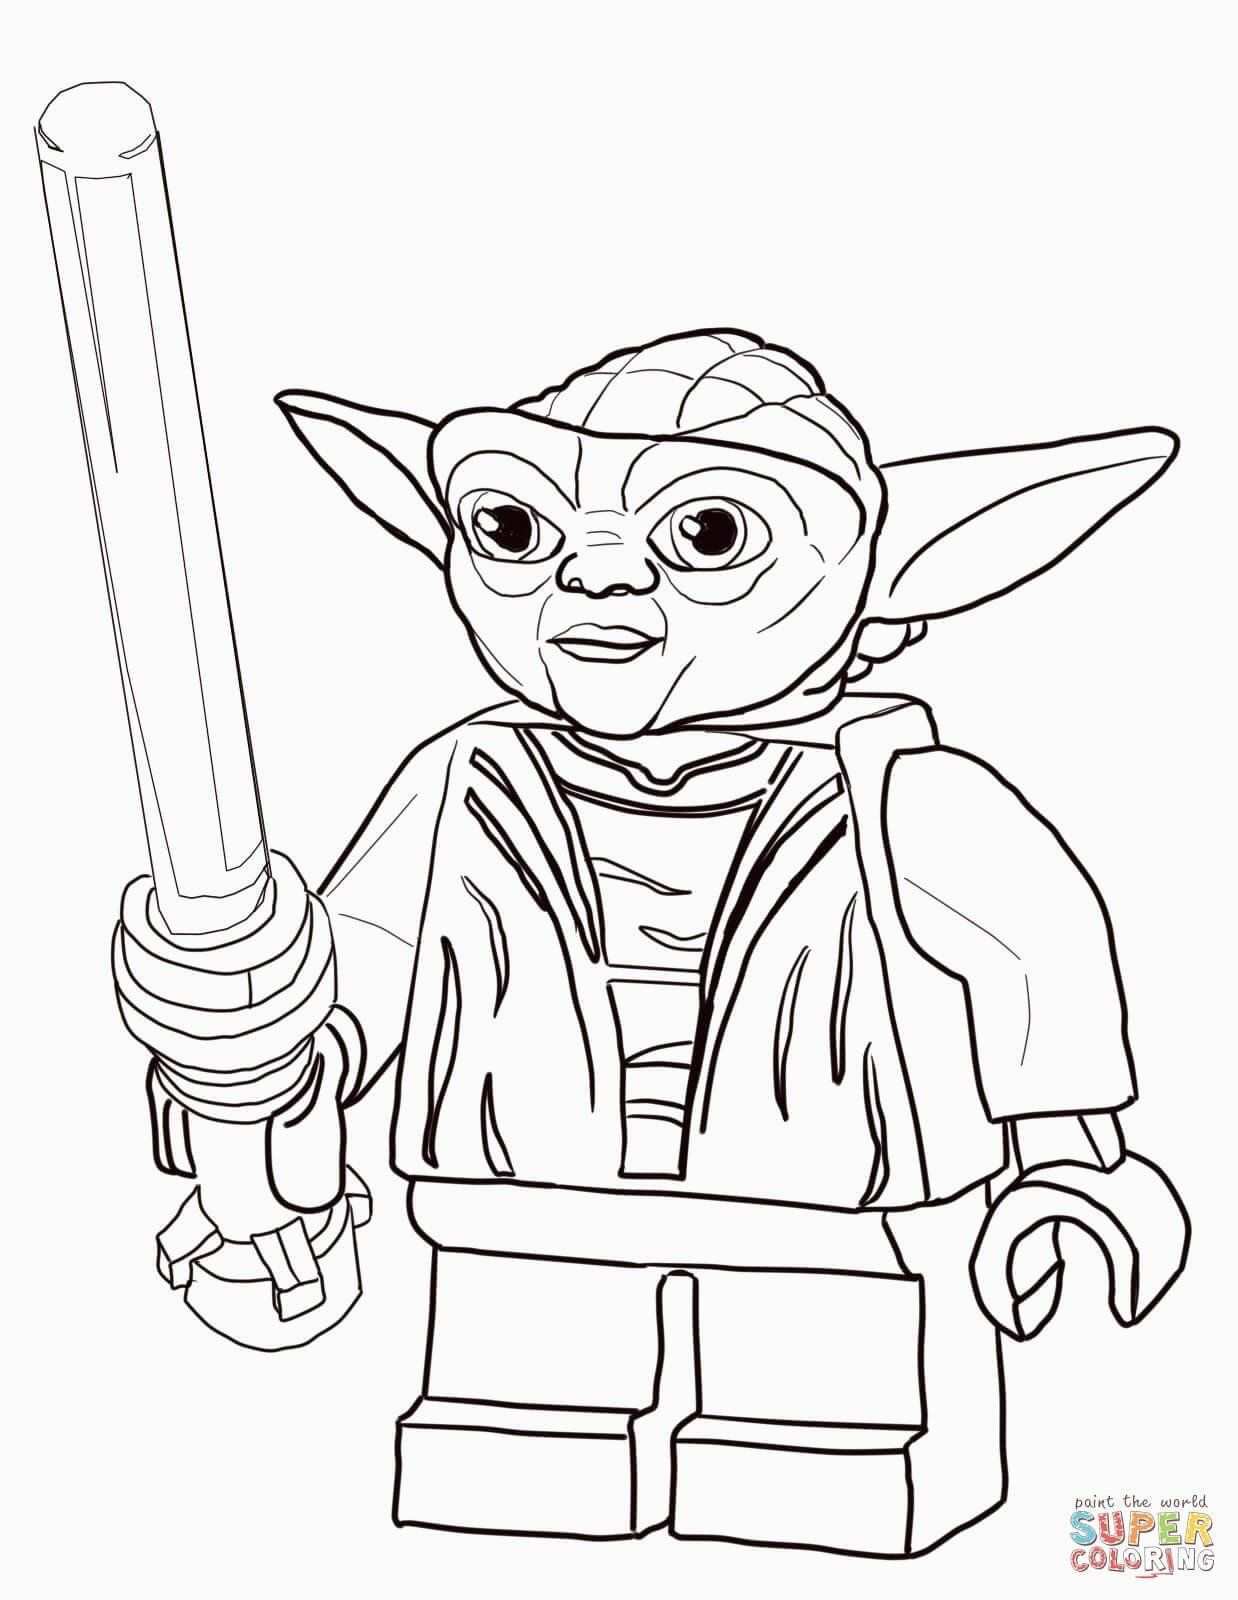 Star Wars Coloring Book Fresh Coloring Pages Fabulous Star Wars Coloring Sheets Star